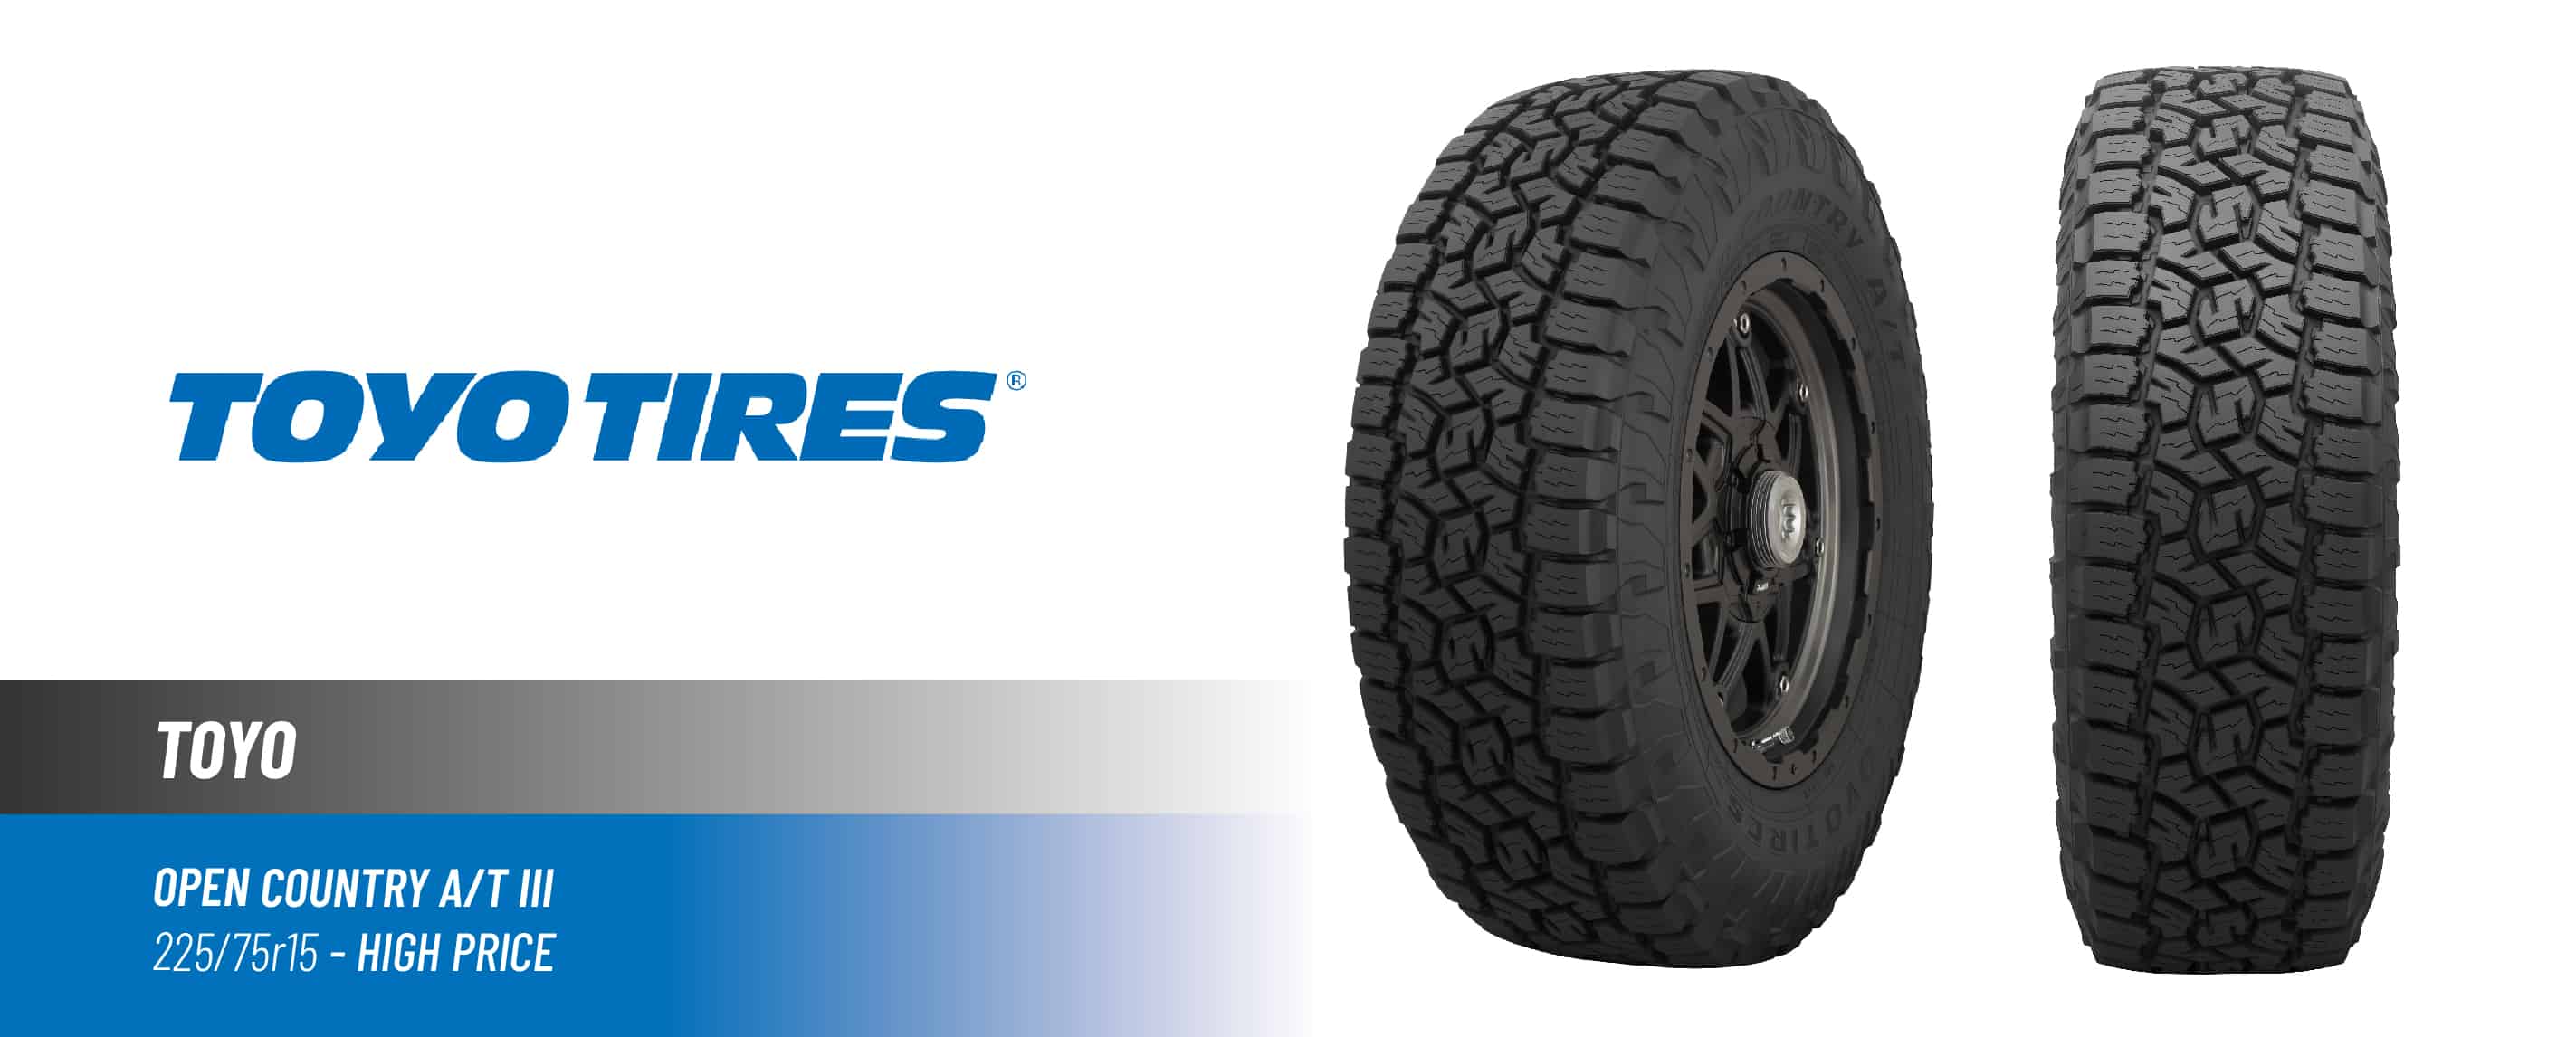 Top #1 High Price: Toyo Open Country A/T III - best 225/75r15